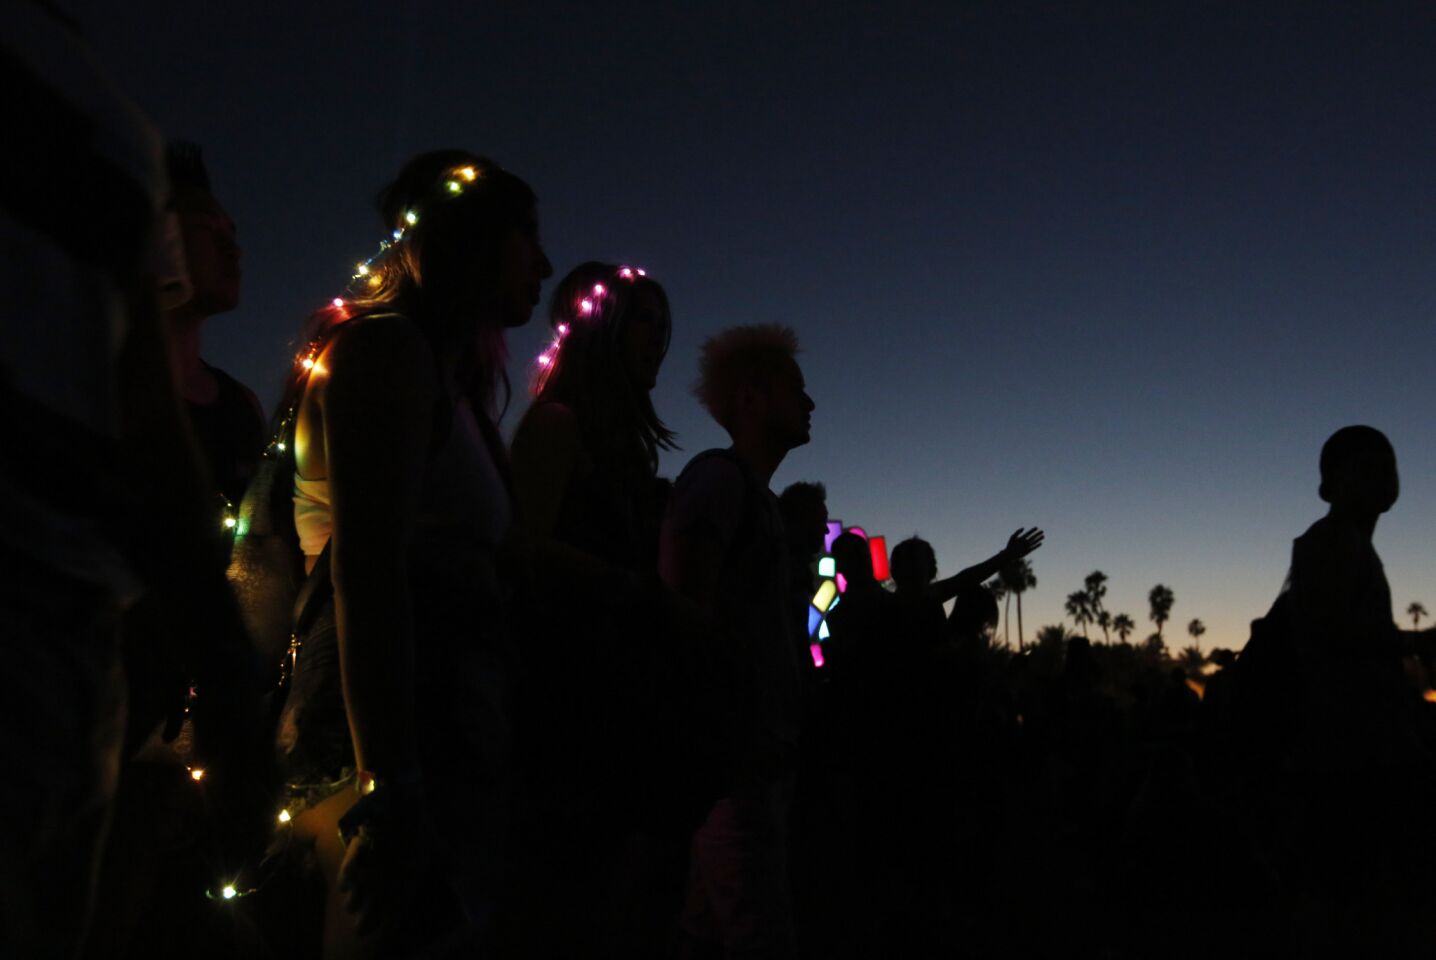 Two women wear lights on their bodies as they listen to a performance at Coachella.